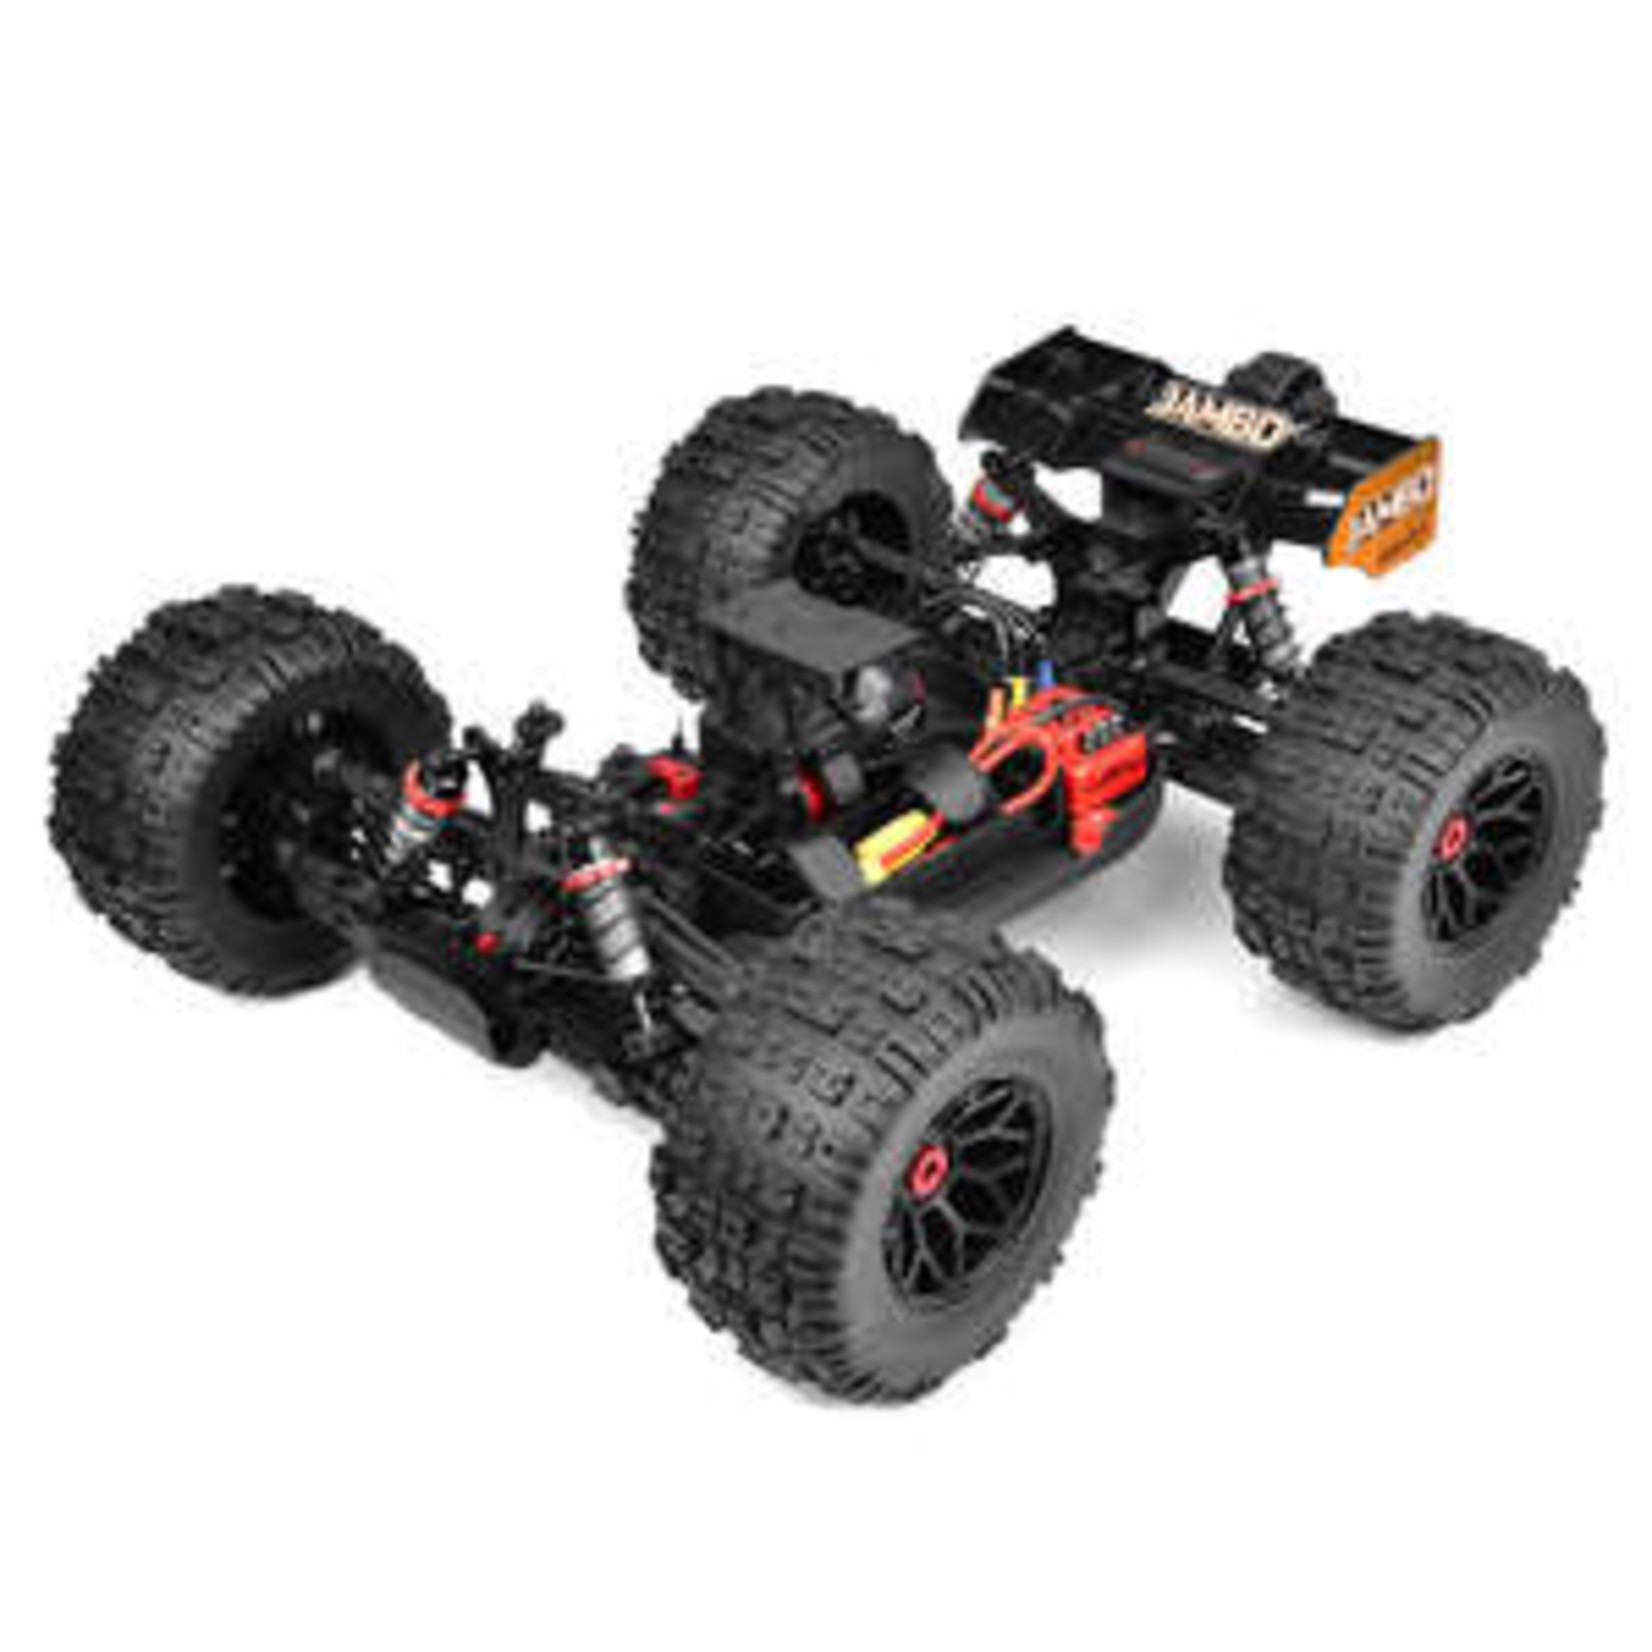 Corally (Team Corally) COR00166 Jambo XP 1/8 Monster Truck, SWB 4WD 6S Brushless RTR (Battery/Charger not included)